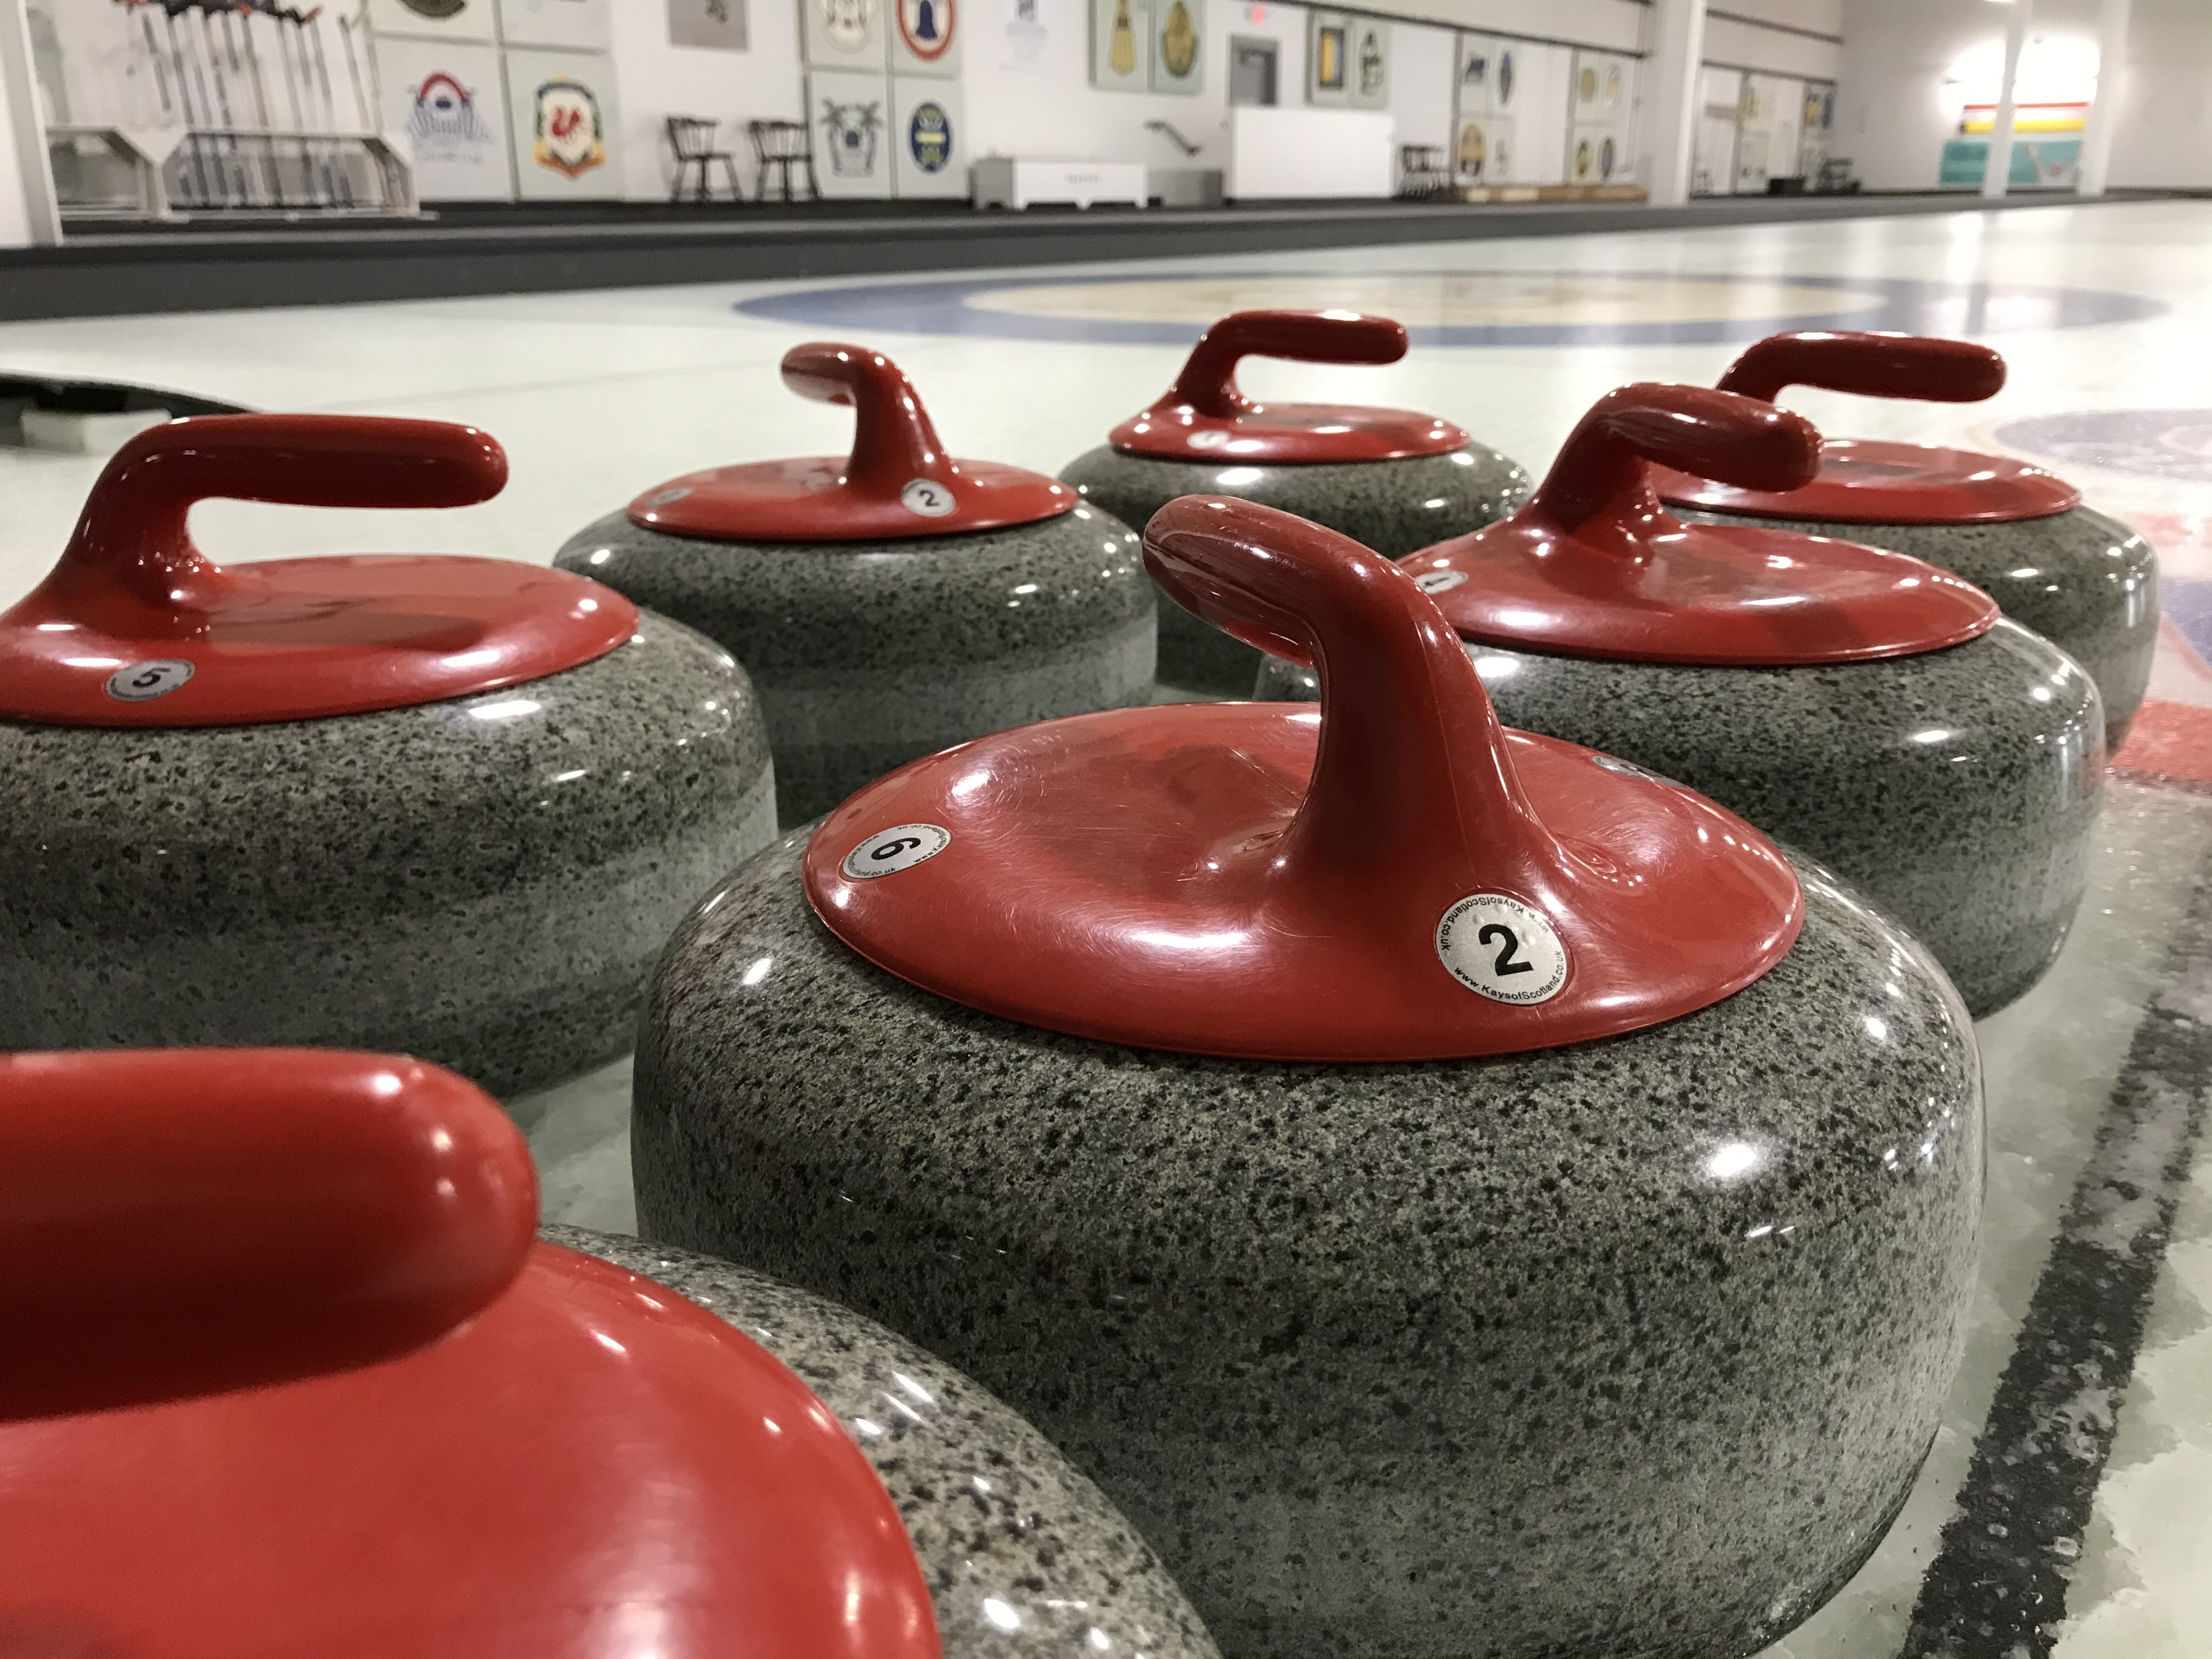 Mayfield Curling Club, adhering to social distancing, has just opened in its new home in Warrensville Heights. Here’s a look at what the club and its facility are about.